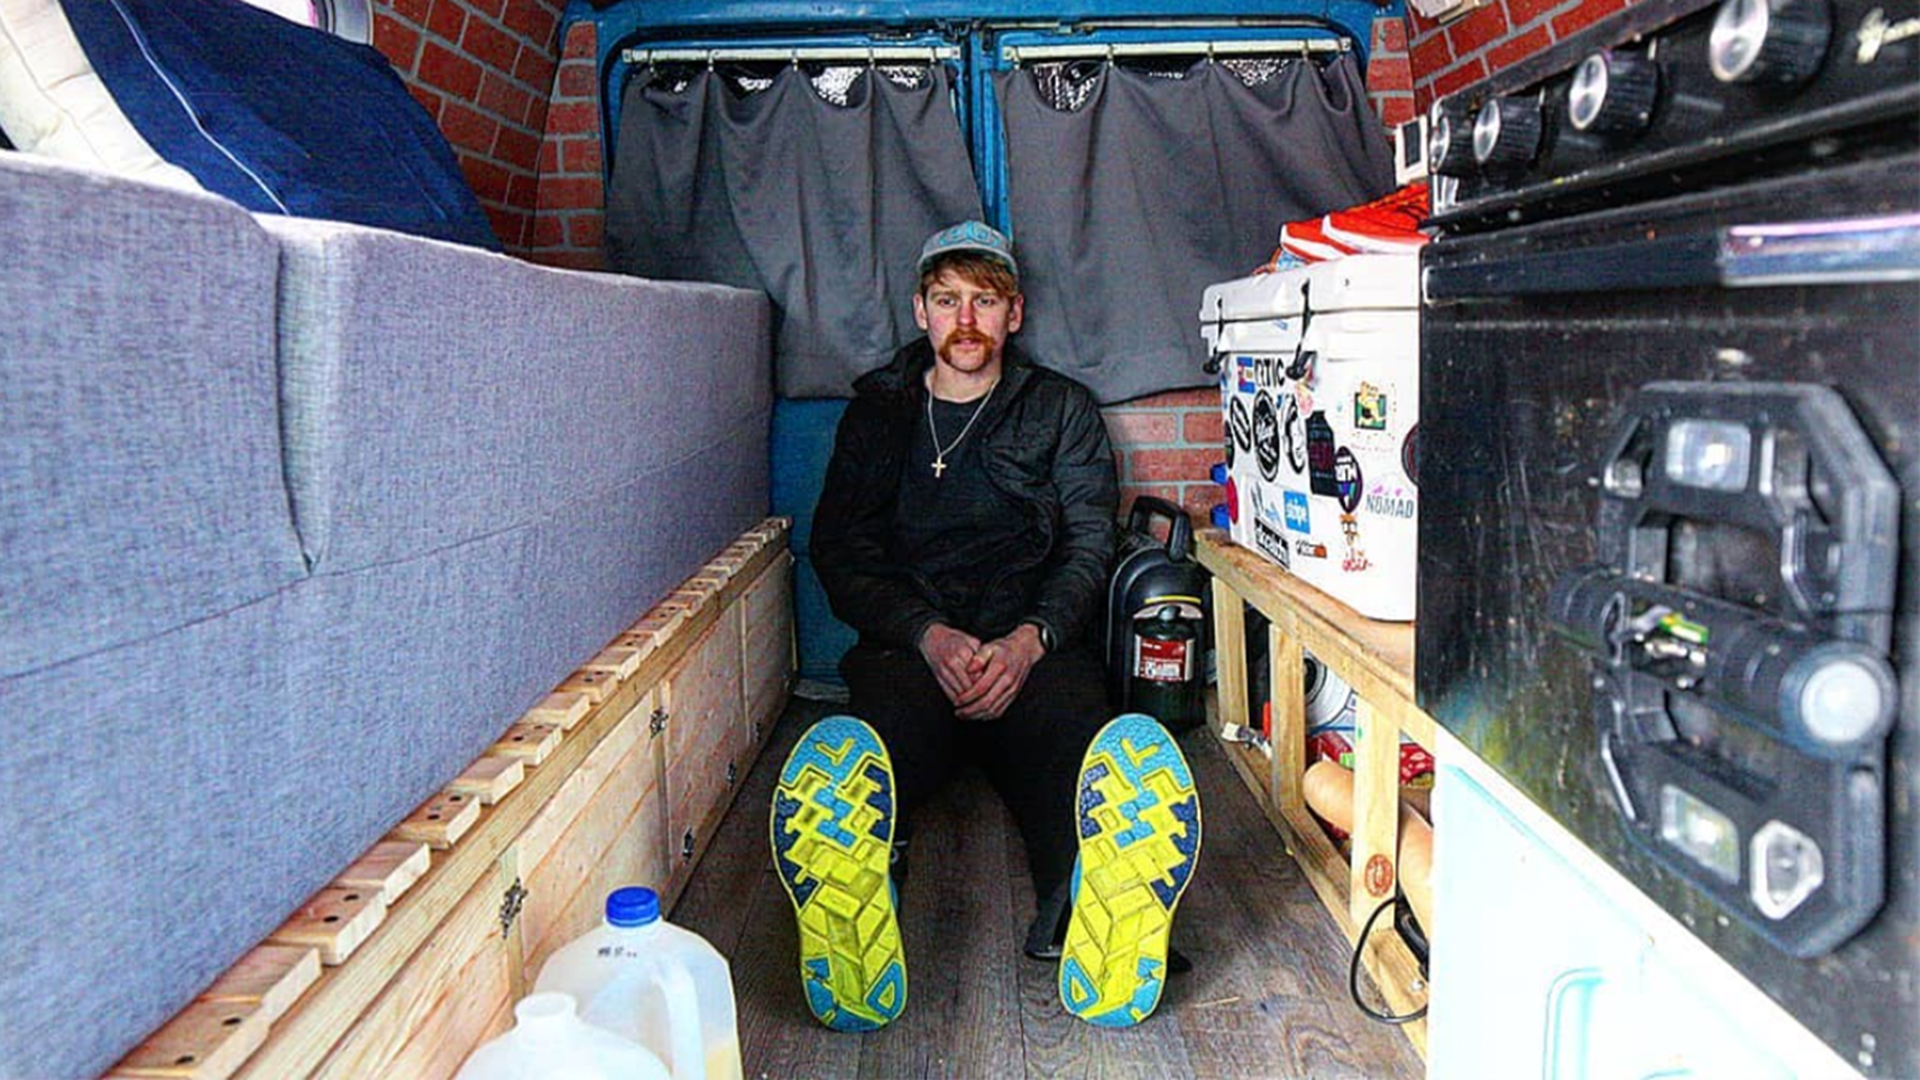 Colby Mehmen runs 20 miles per day, sleeps in a freezing '76 Chevy and showers at a public park. But he's not being sarcastic when he says he's "living the dream."